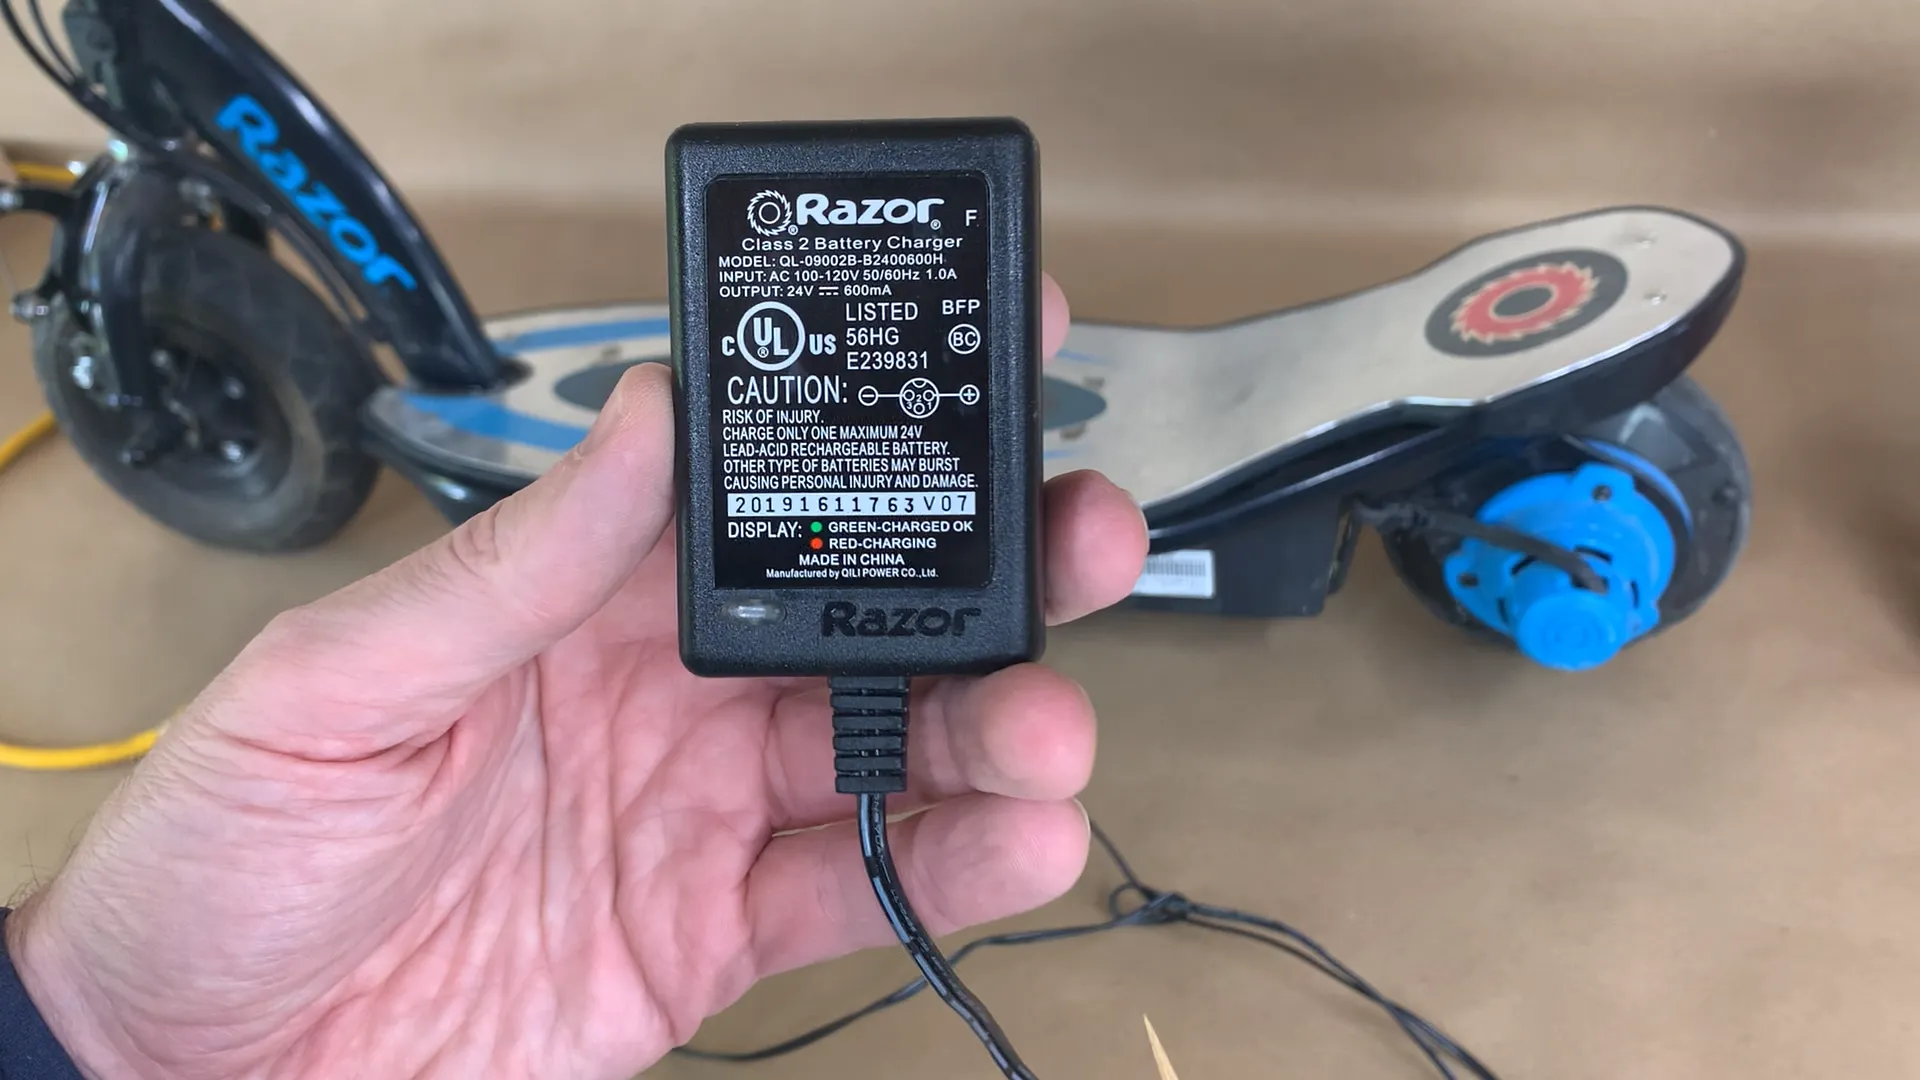 Razor battery charger